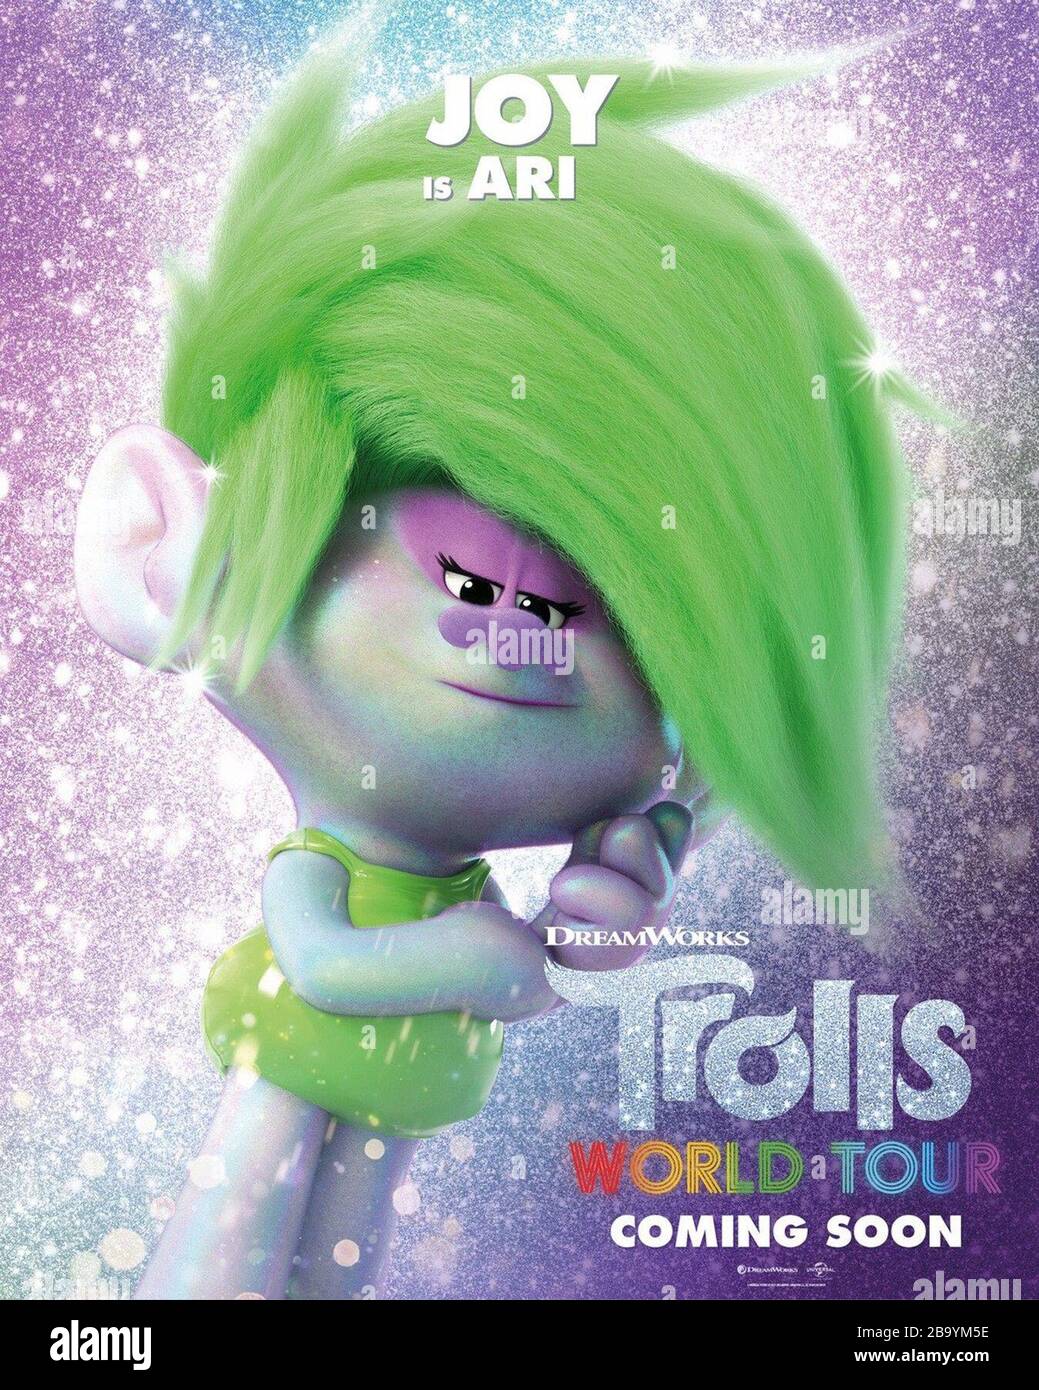 Thank God for the Release of 'Trolls World Tour